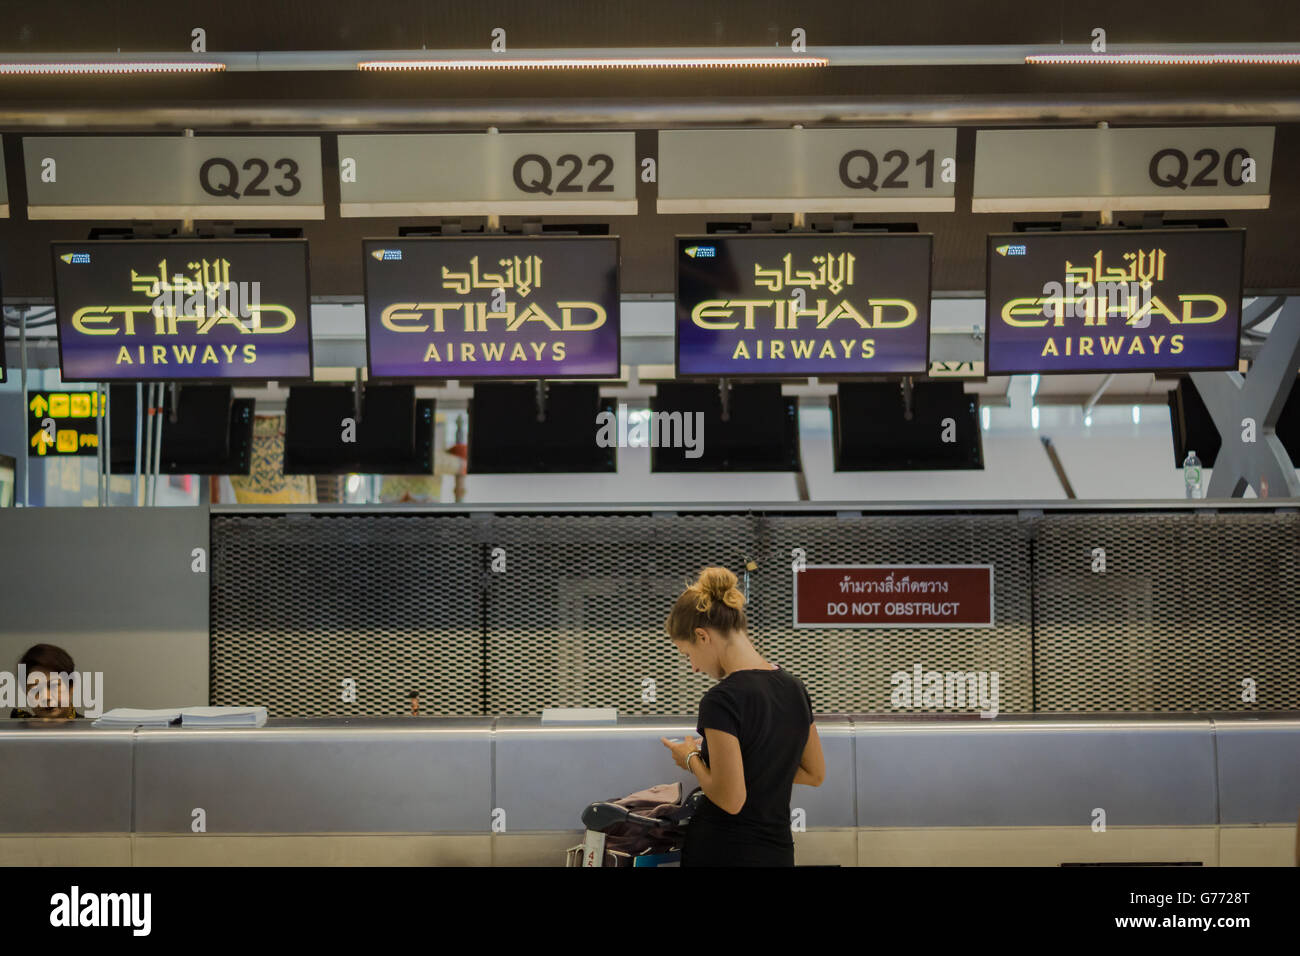 Travellers at Etihad Airways check-in counter in international airport Stock Photo